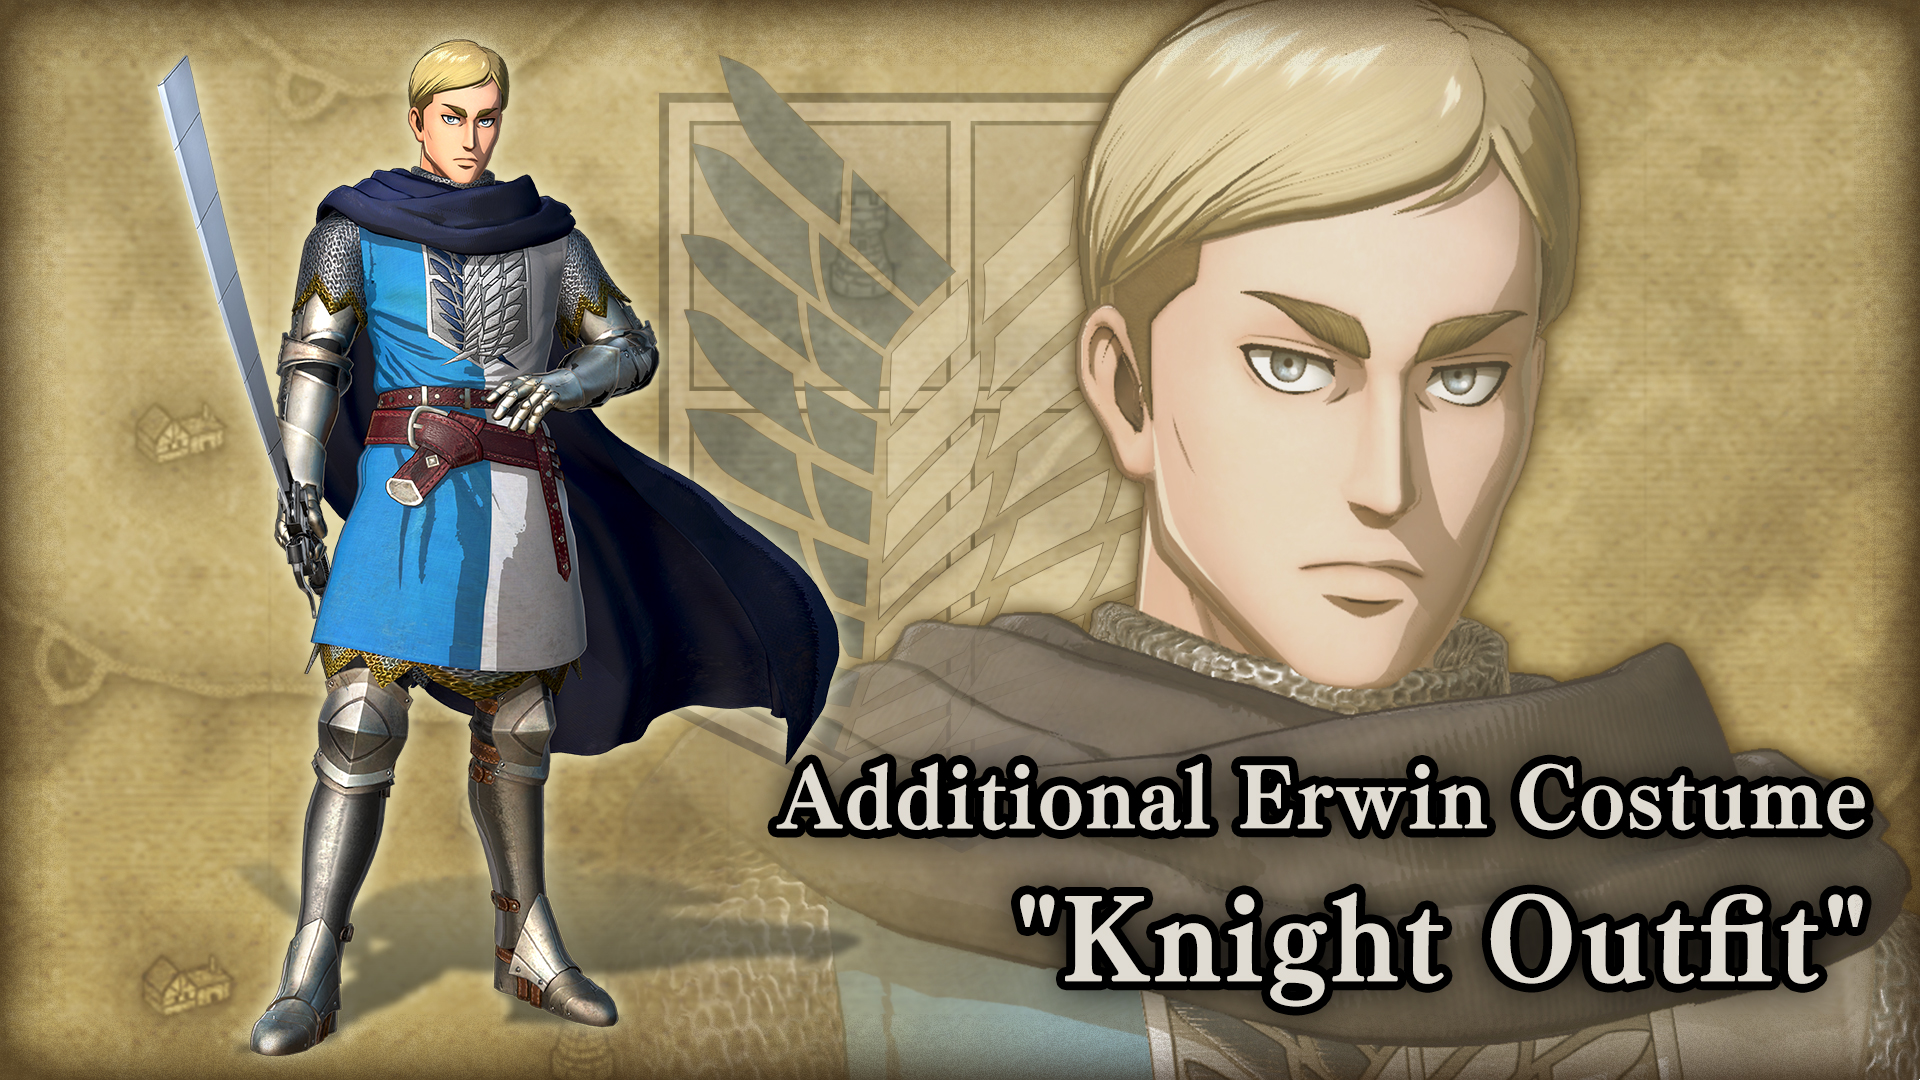 Additional Erwin Costume: "Knight Outfit"